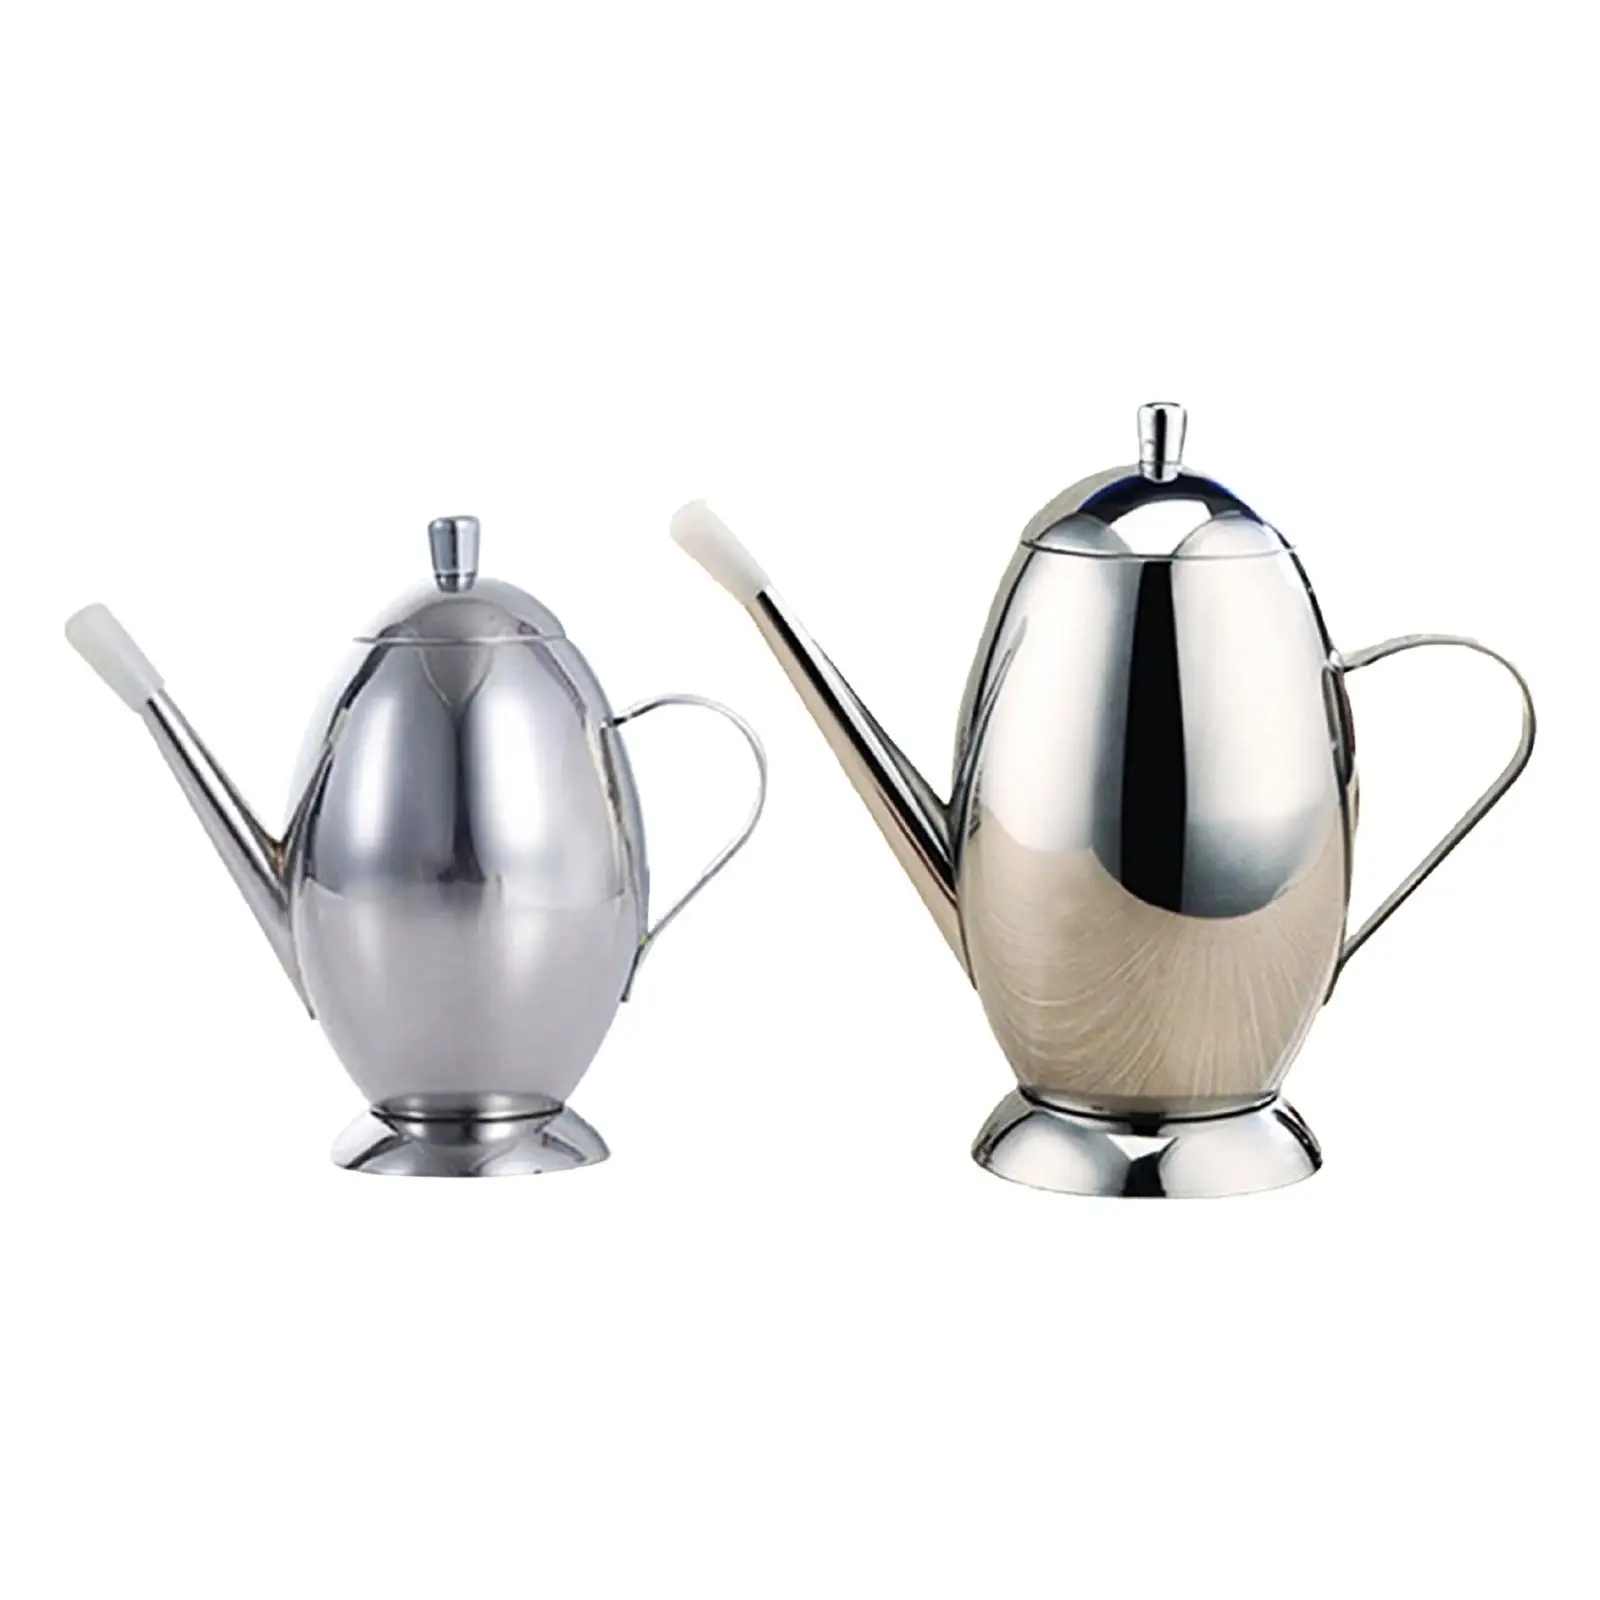 Stainless Steel Oil Pot Dispenser Portable Oil Storage Container Olive Oil Bottle Storage Can for restaurant Cooking